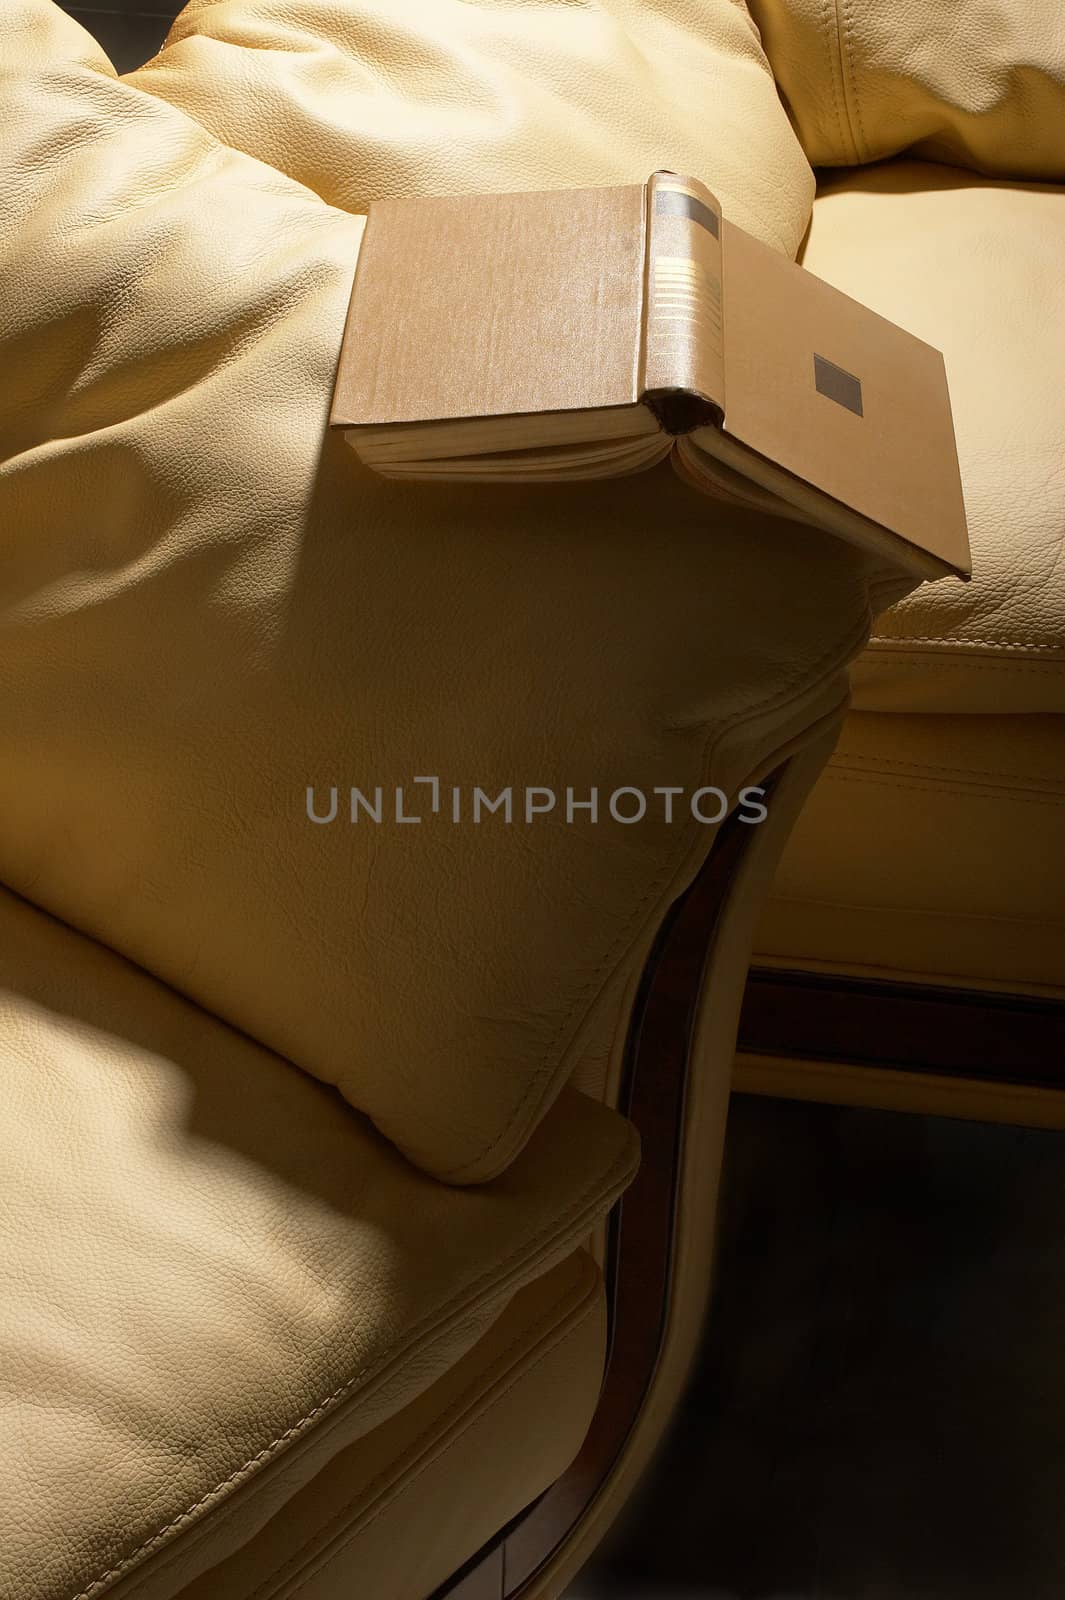 The open book on a leather brown sofa